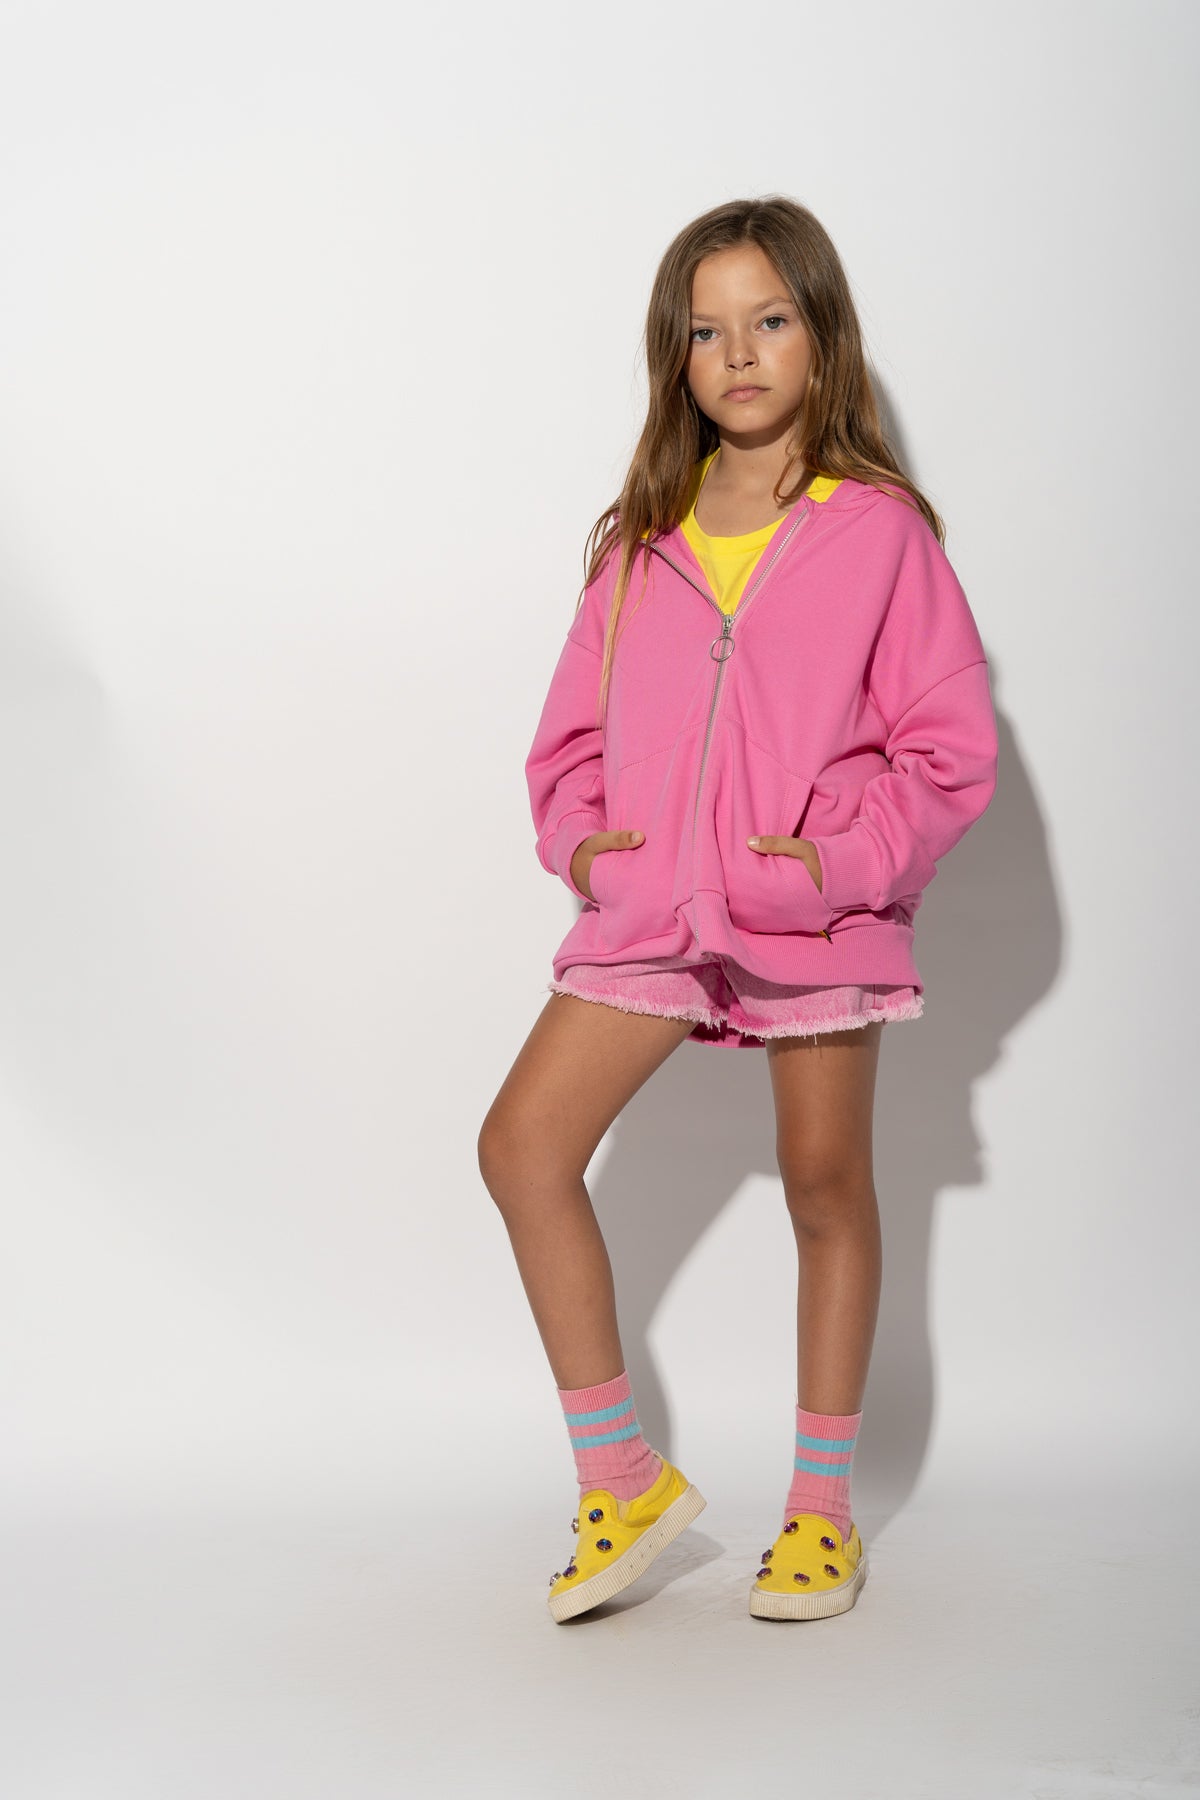 PINK JACKET WITH EMBROIDERED LOGO ma kids